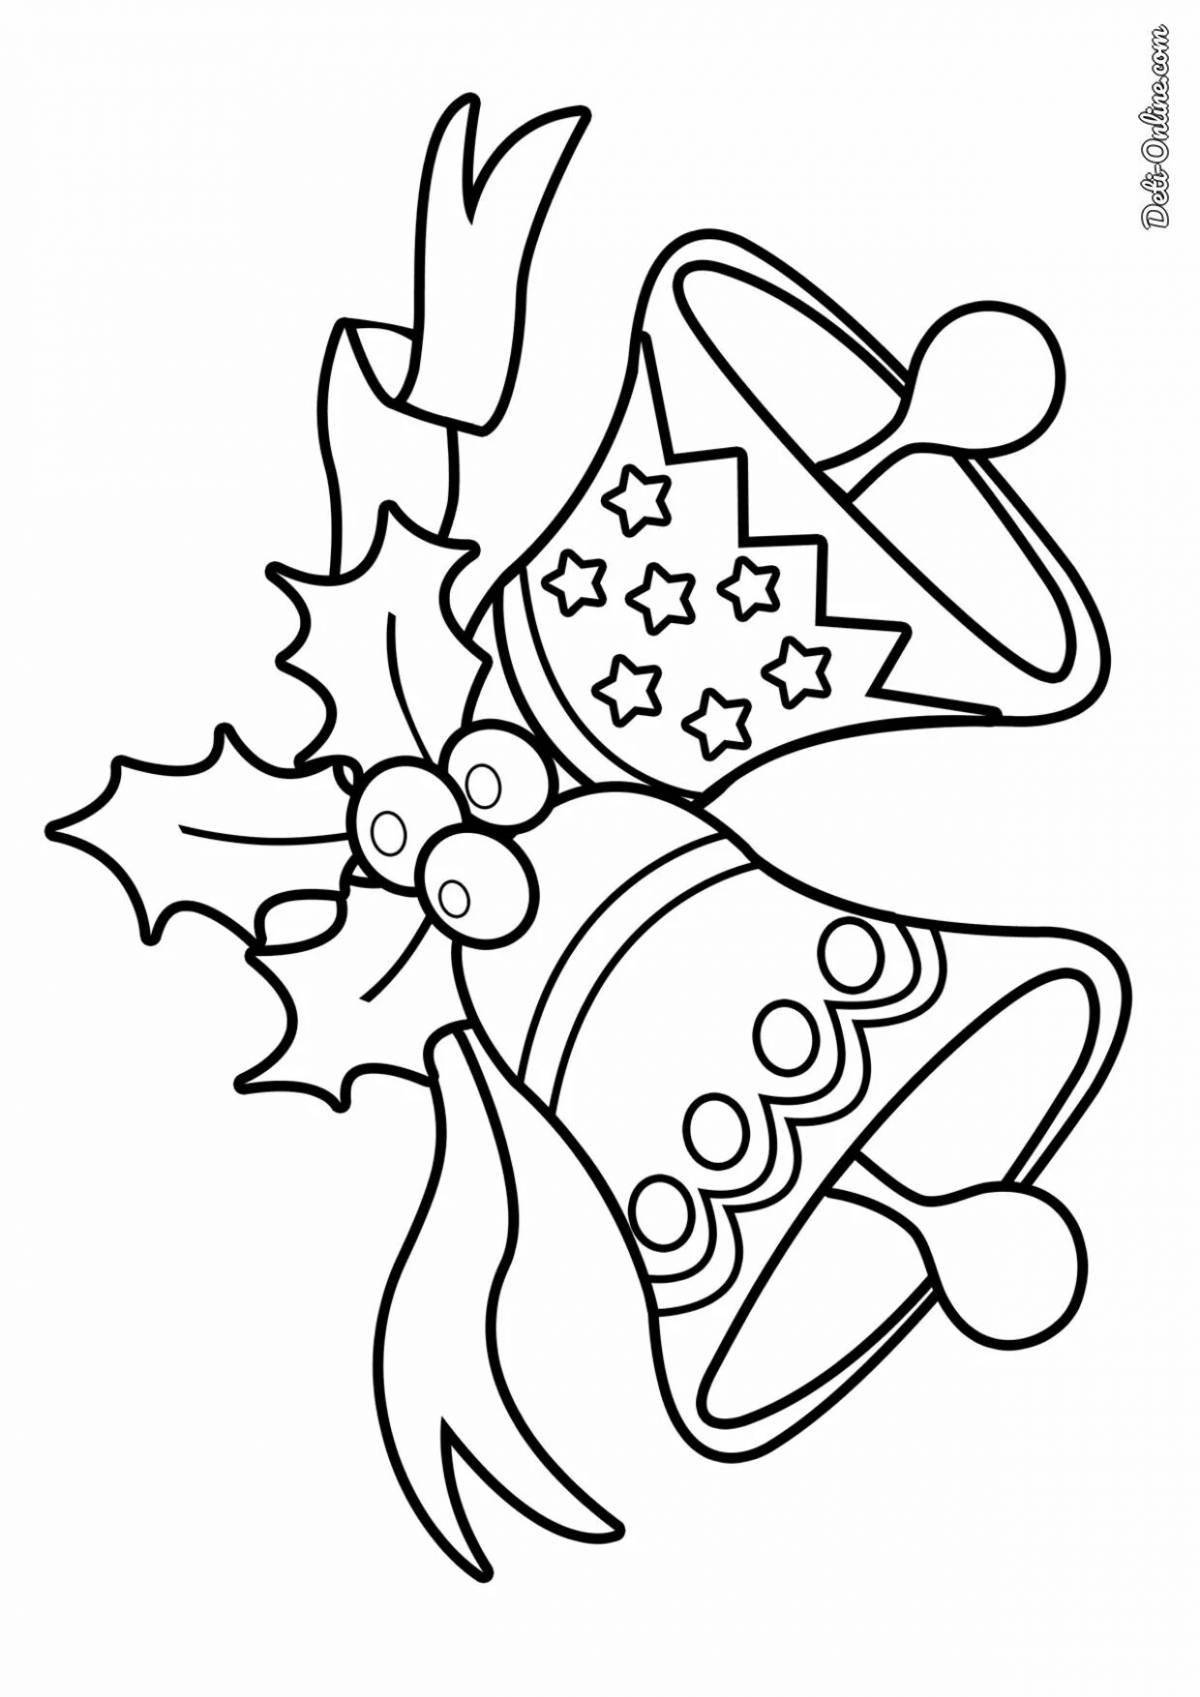 Calming jingle bells coloring page